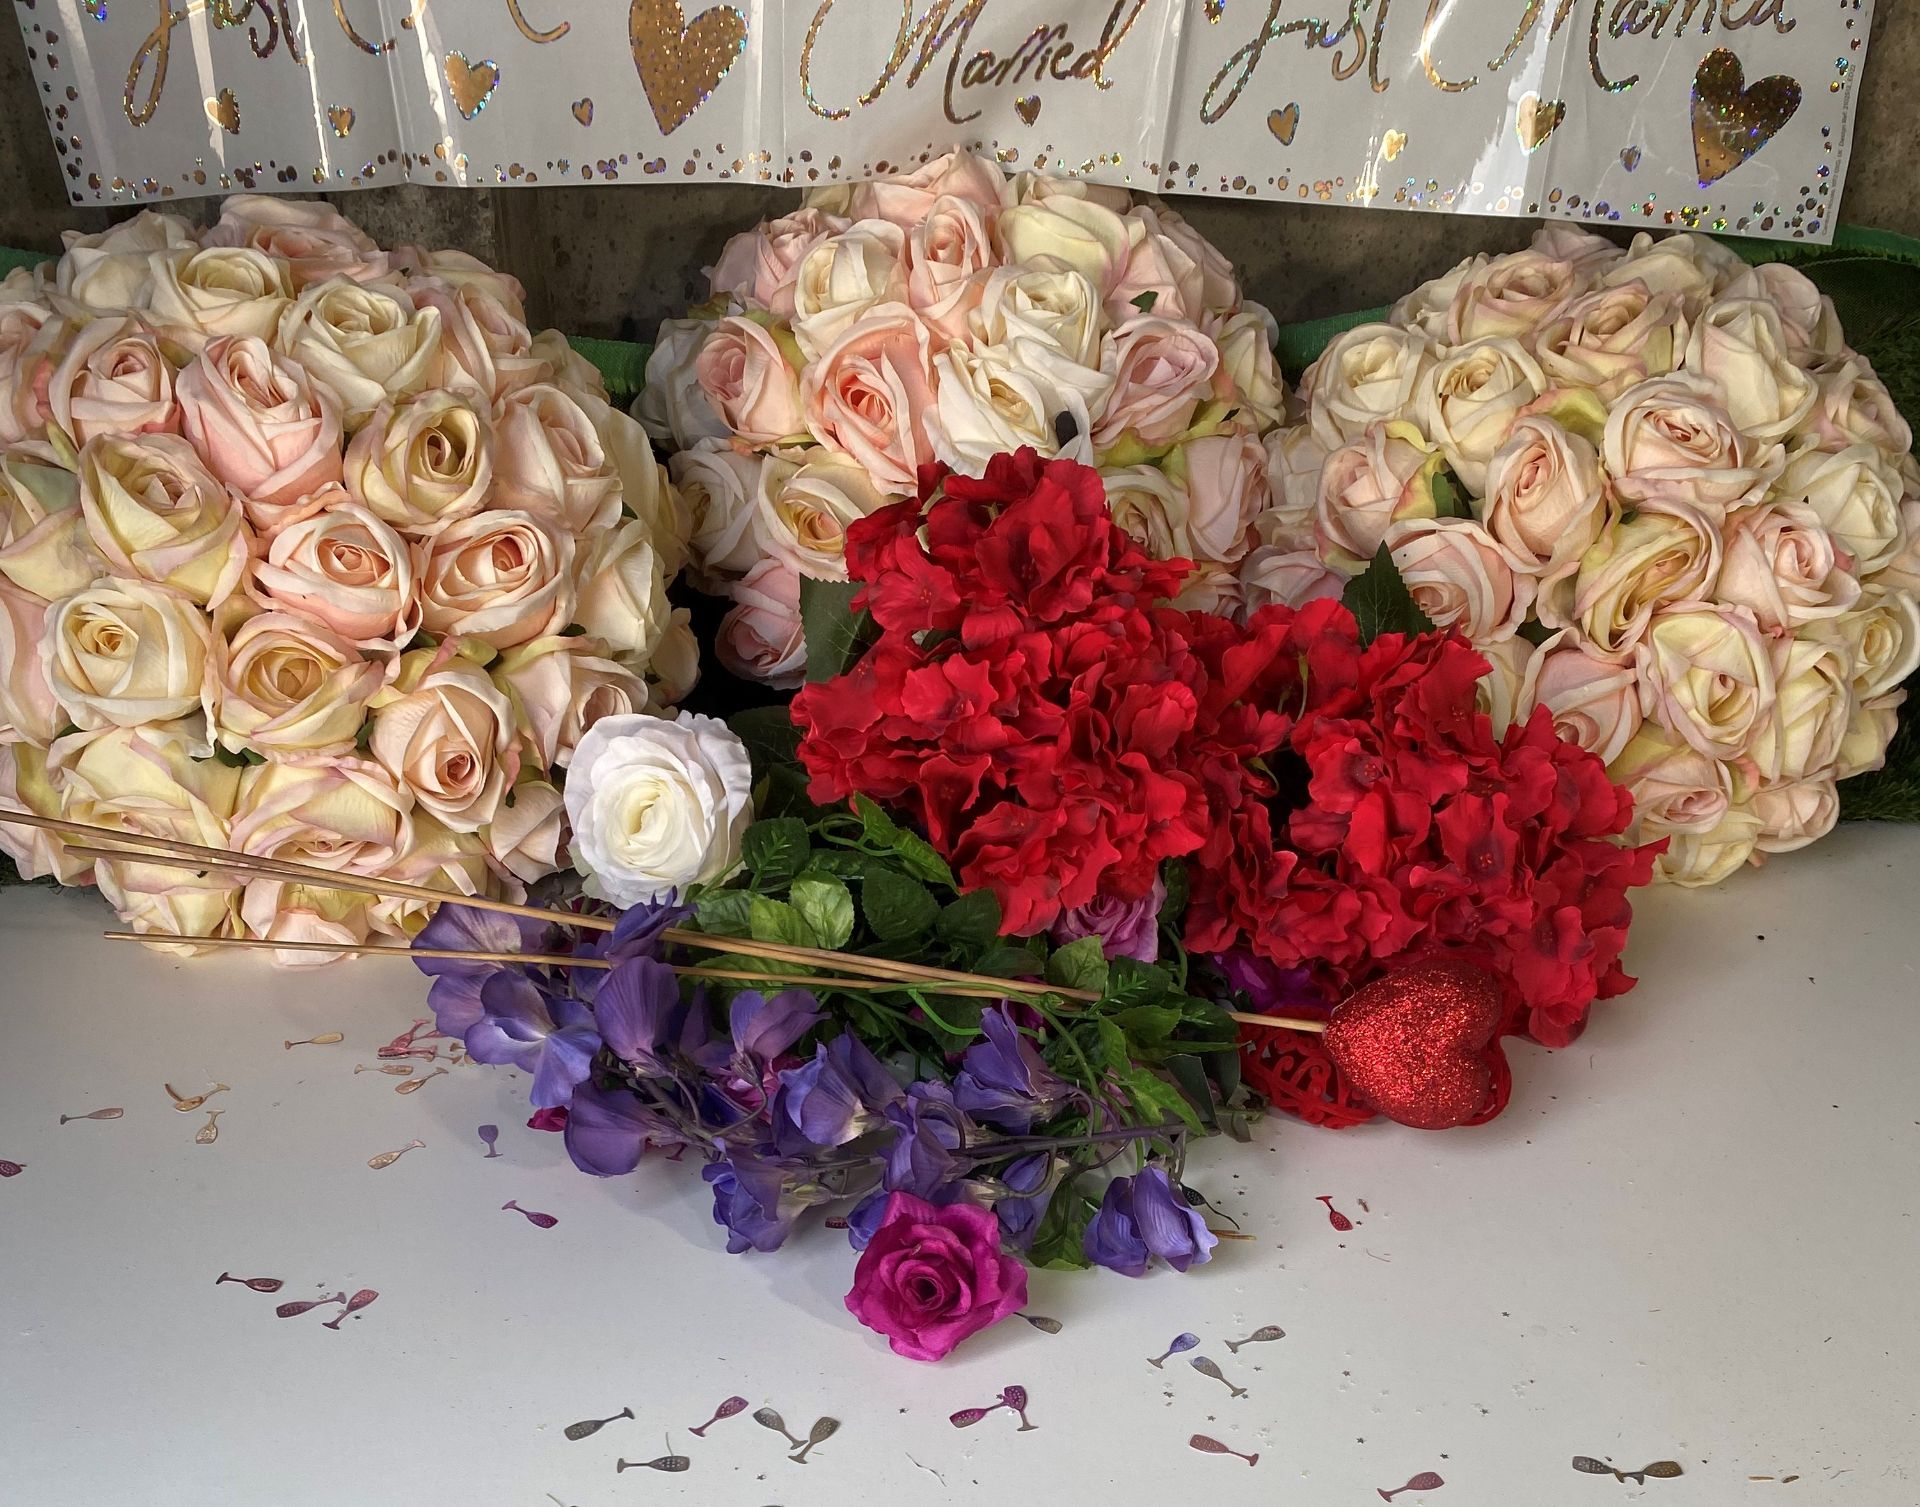 6 x Artificial Rose Bouquets - Image 2 of 2